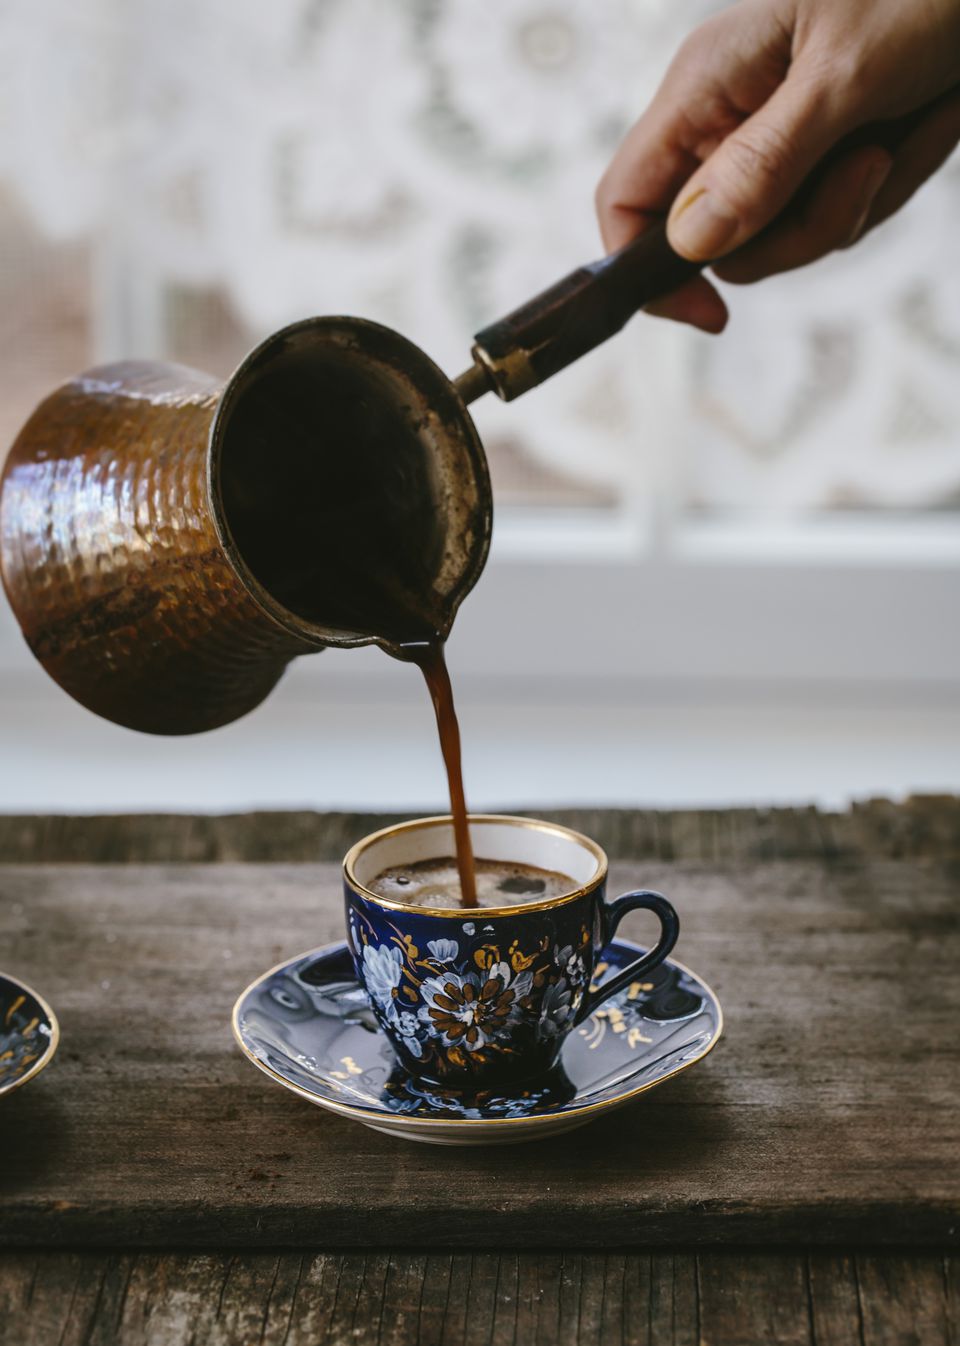 Palestinian Coffee: A Delicious and Historic Beverage